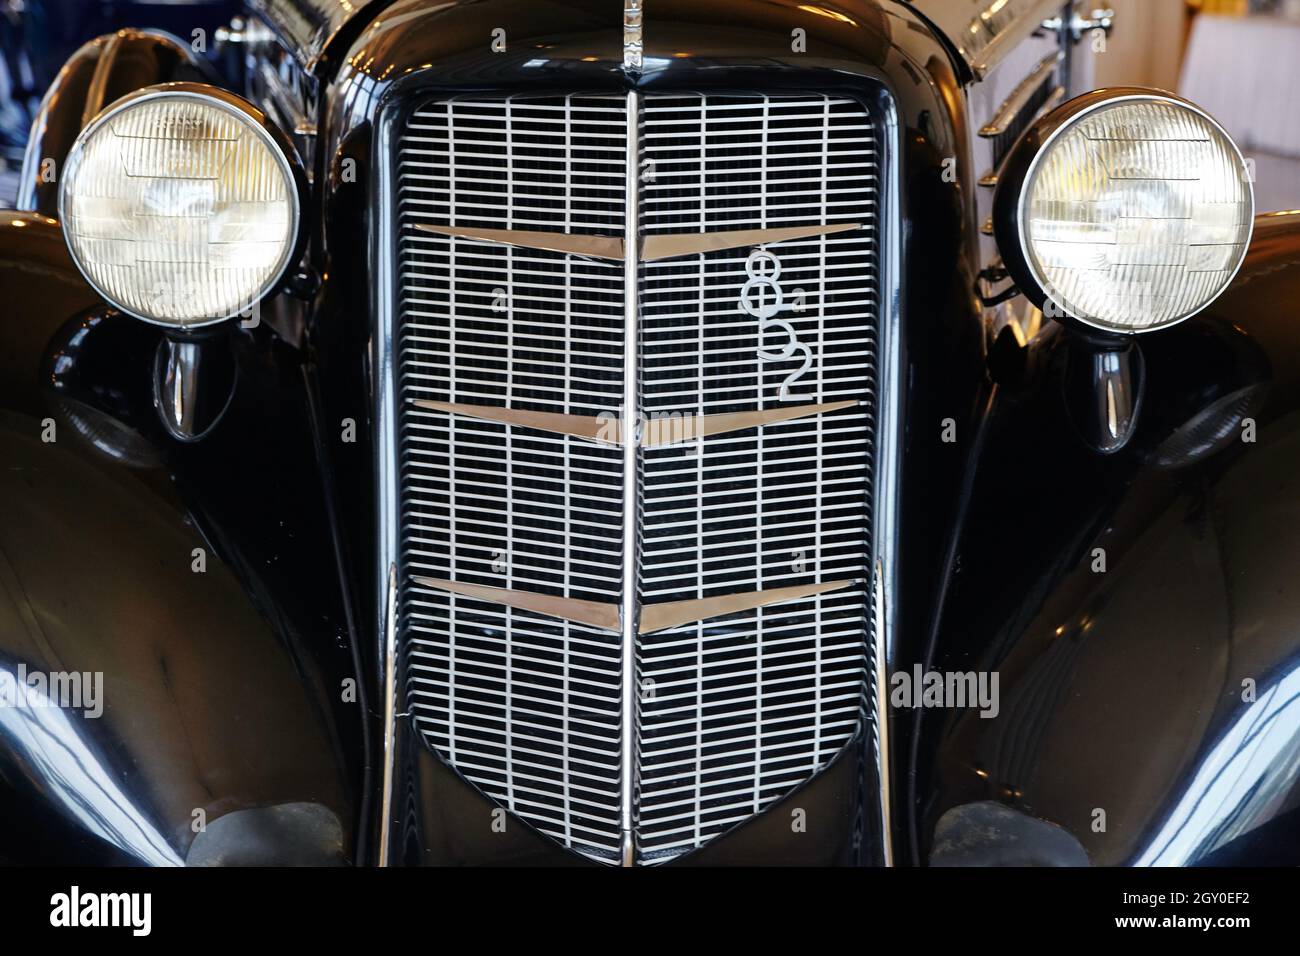 Close-up front shot of an antique car with a tall front grill and two lights like eyes Stock Photo